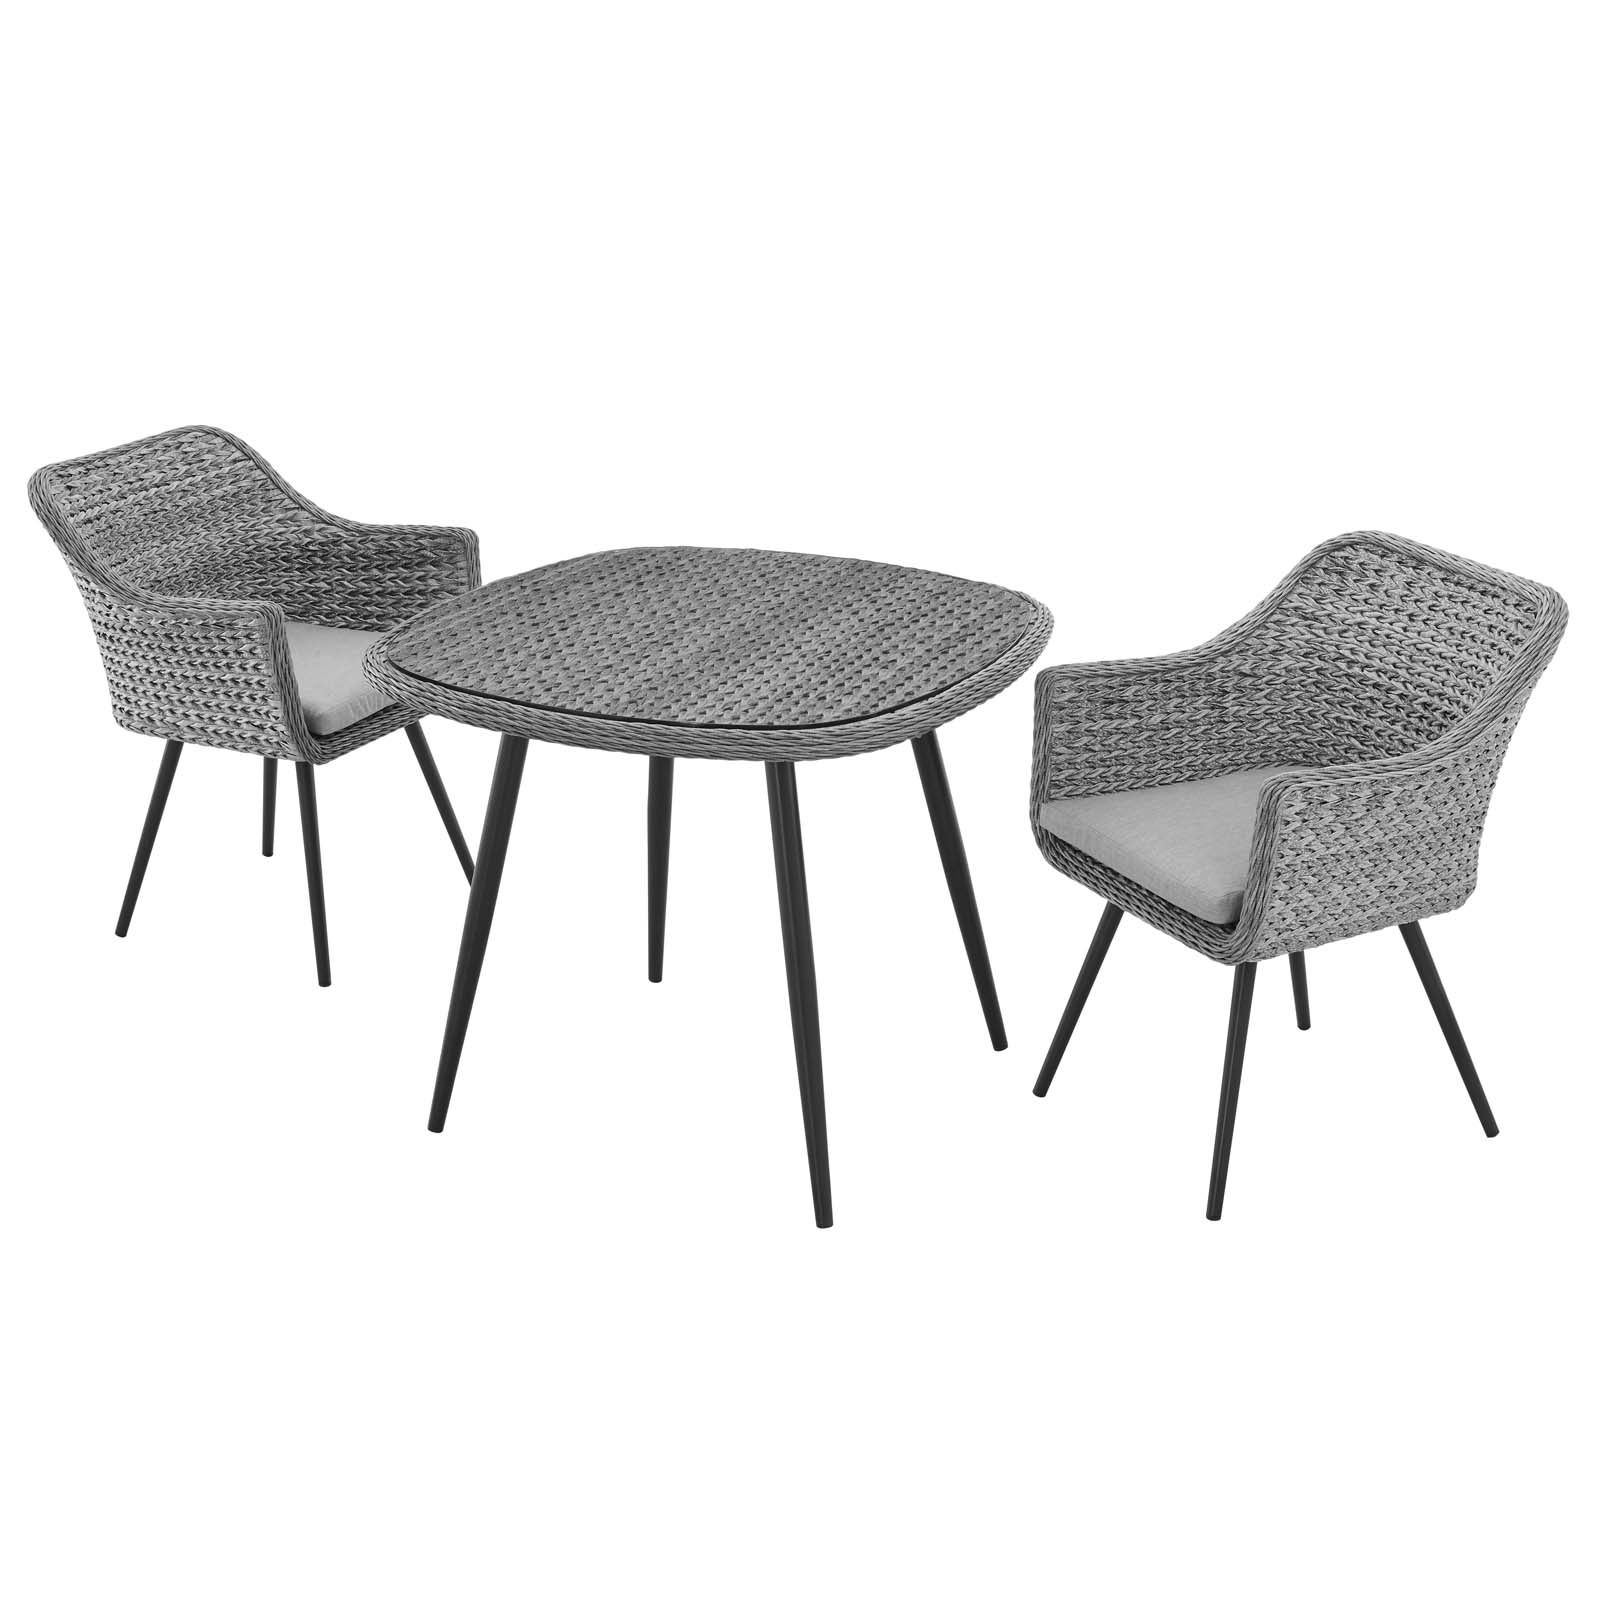 Contemporary Modern Urban Designer Outdoor Patio Balcony Garden Furniture Side Dining Chair and Table Set, Fabric Rattan Wicker Aluminum, Grey Gray - image 3 of 8